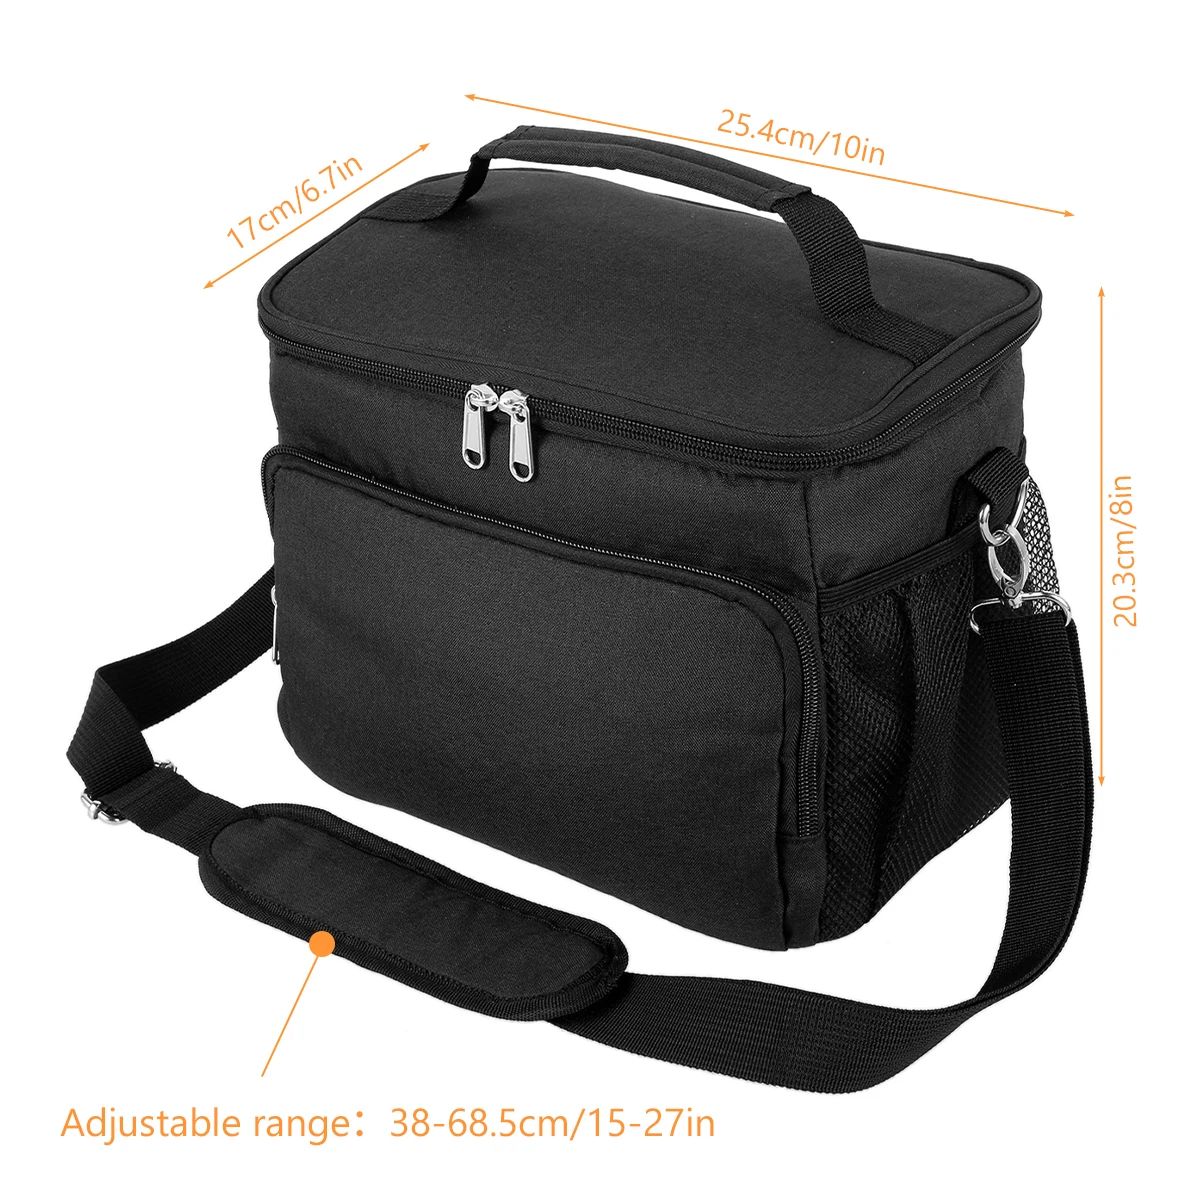 https://ae01.alicdn.com/kf/S79feabbf30684e18b3c89dcc50a6aac3v/Insulated-Lunch-Bag-for-Women-Men-Large-Cooler-Bag-Reusable-Lunch-Box-Water-Resistant-Leakproof-Lunch.jpg